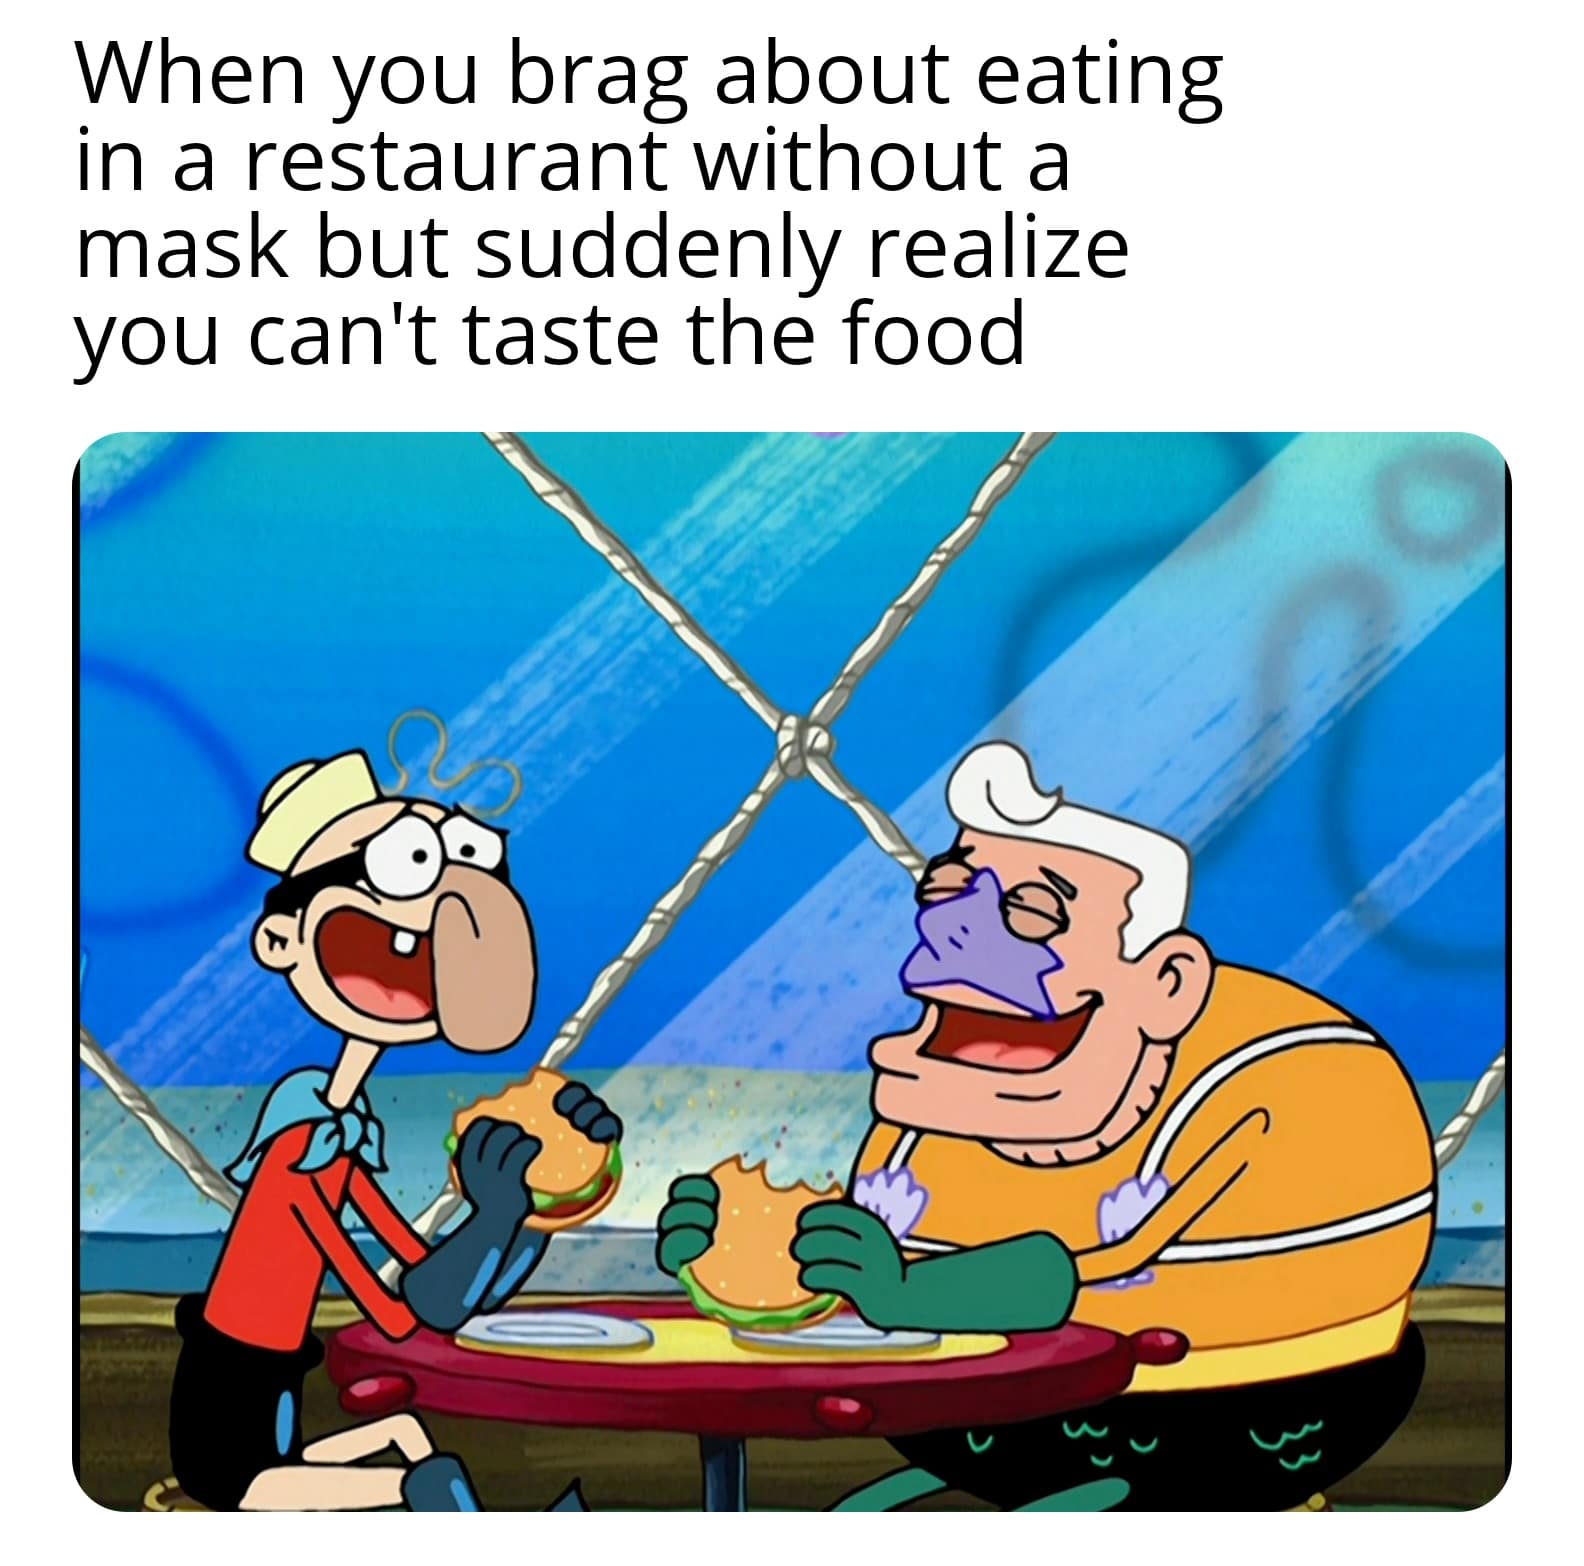 Spongebob, Krabby Patty Spongebob Memes Spongebob, Krabby Patty text: When you brag about eating in a restaurant without a mask but suddenly realize you can't taste the food 